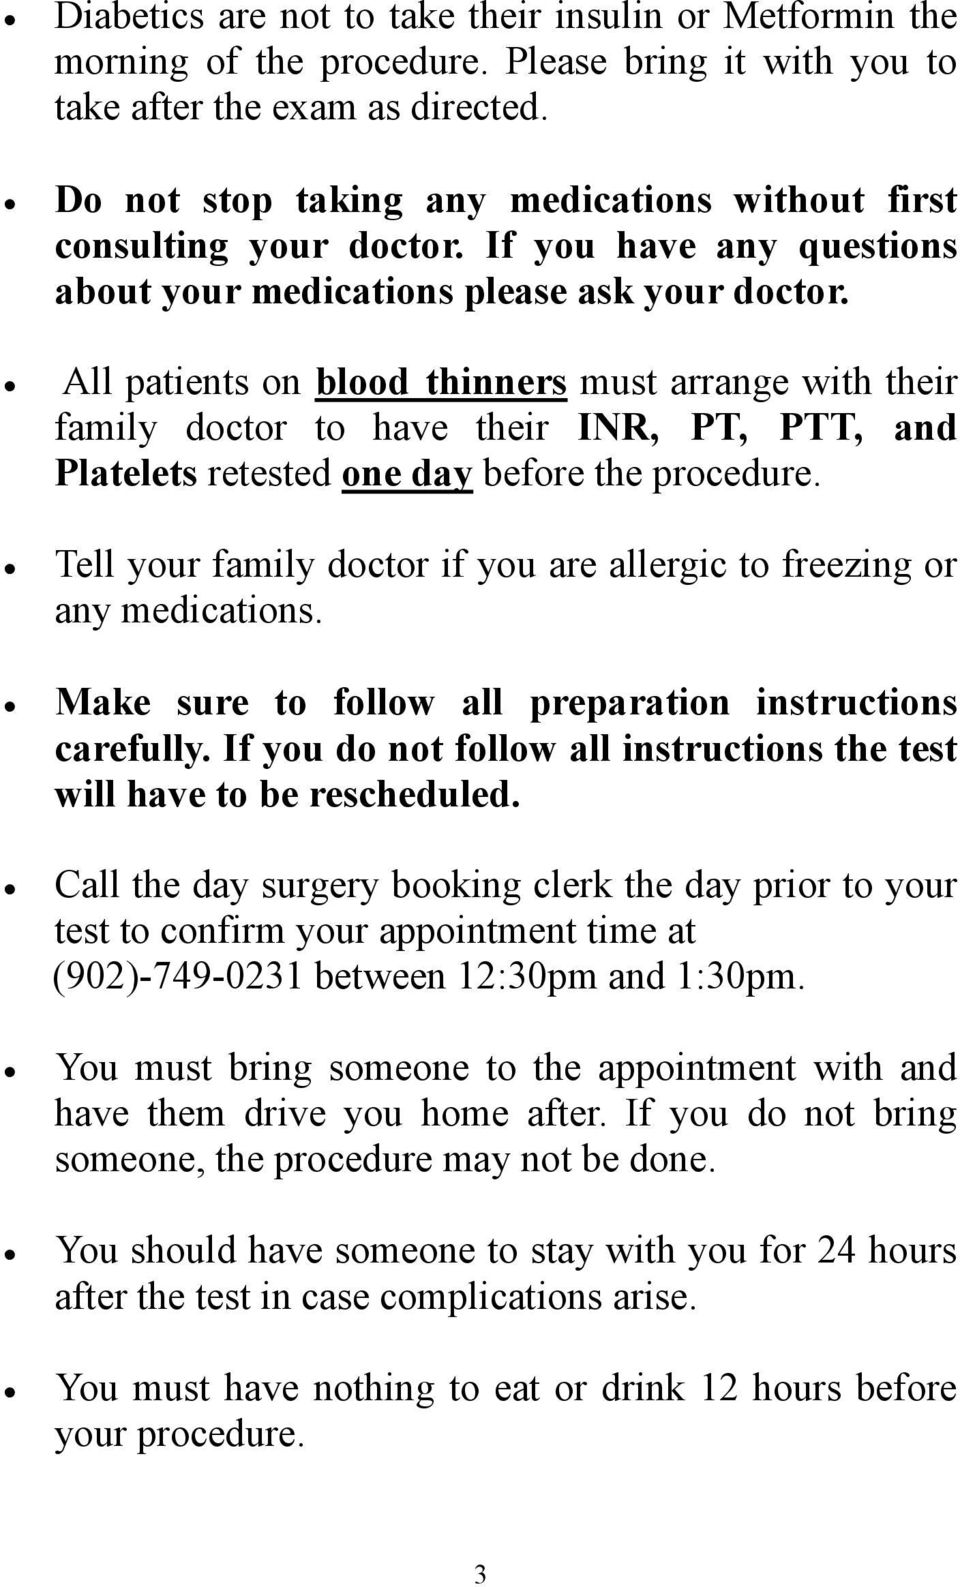 All patients on blood thinners must arrange with their family doctor to have their INR, PT, PTT, and Platelets retested one day before the procedure.